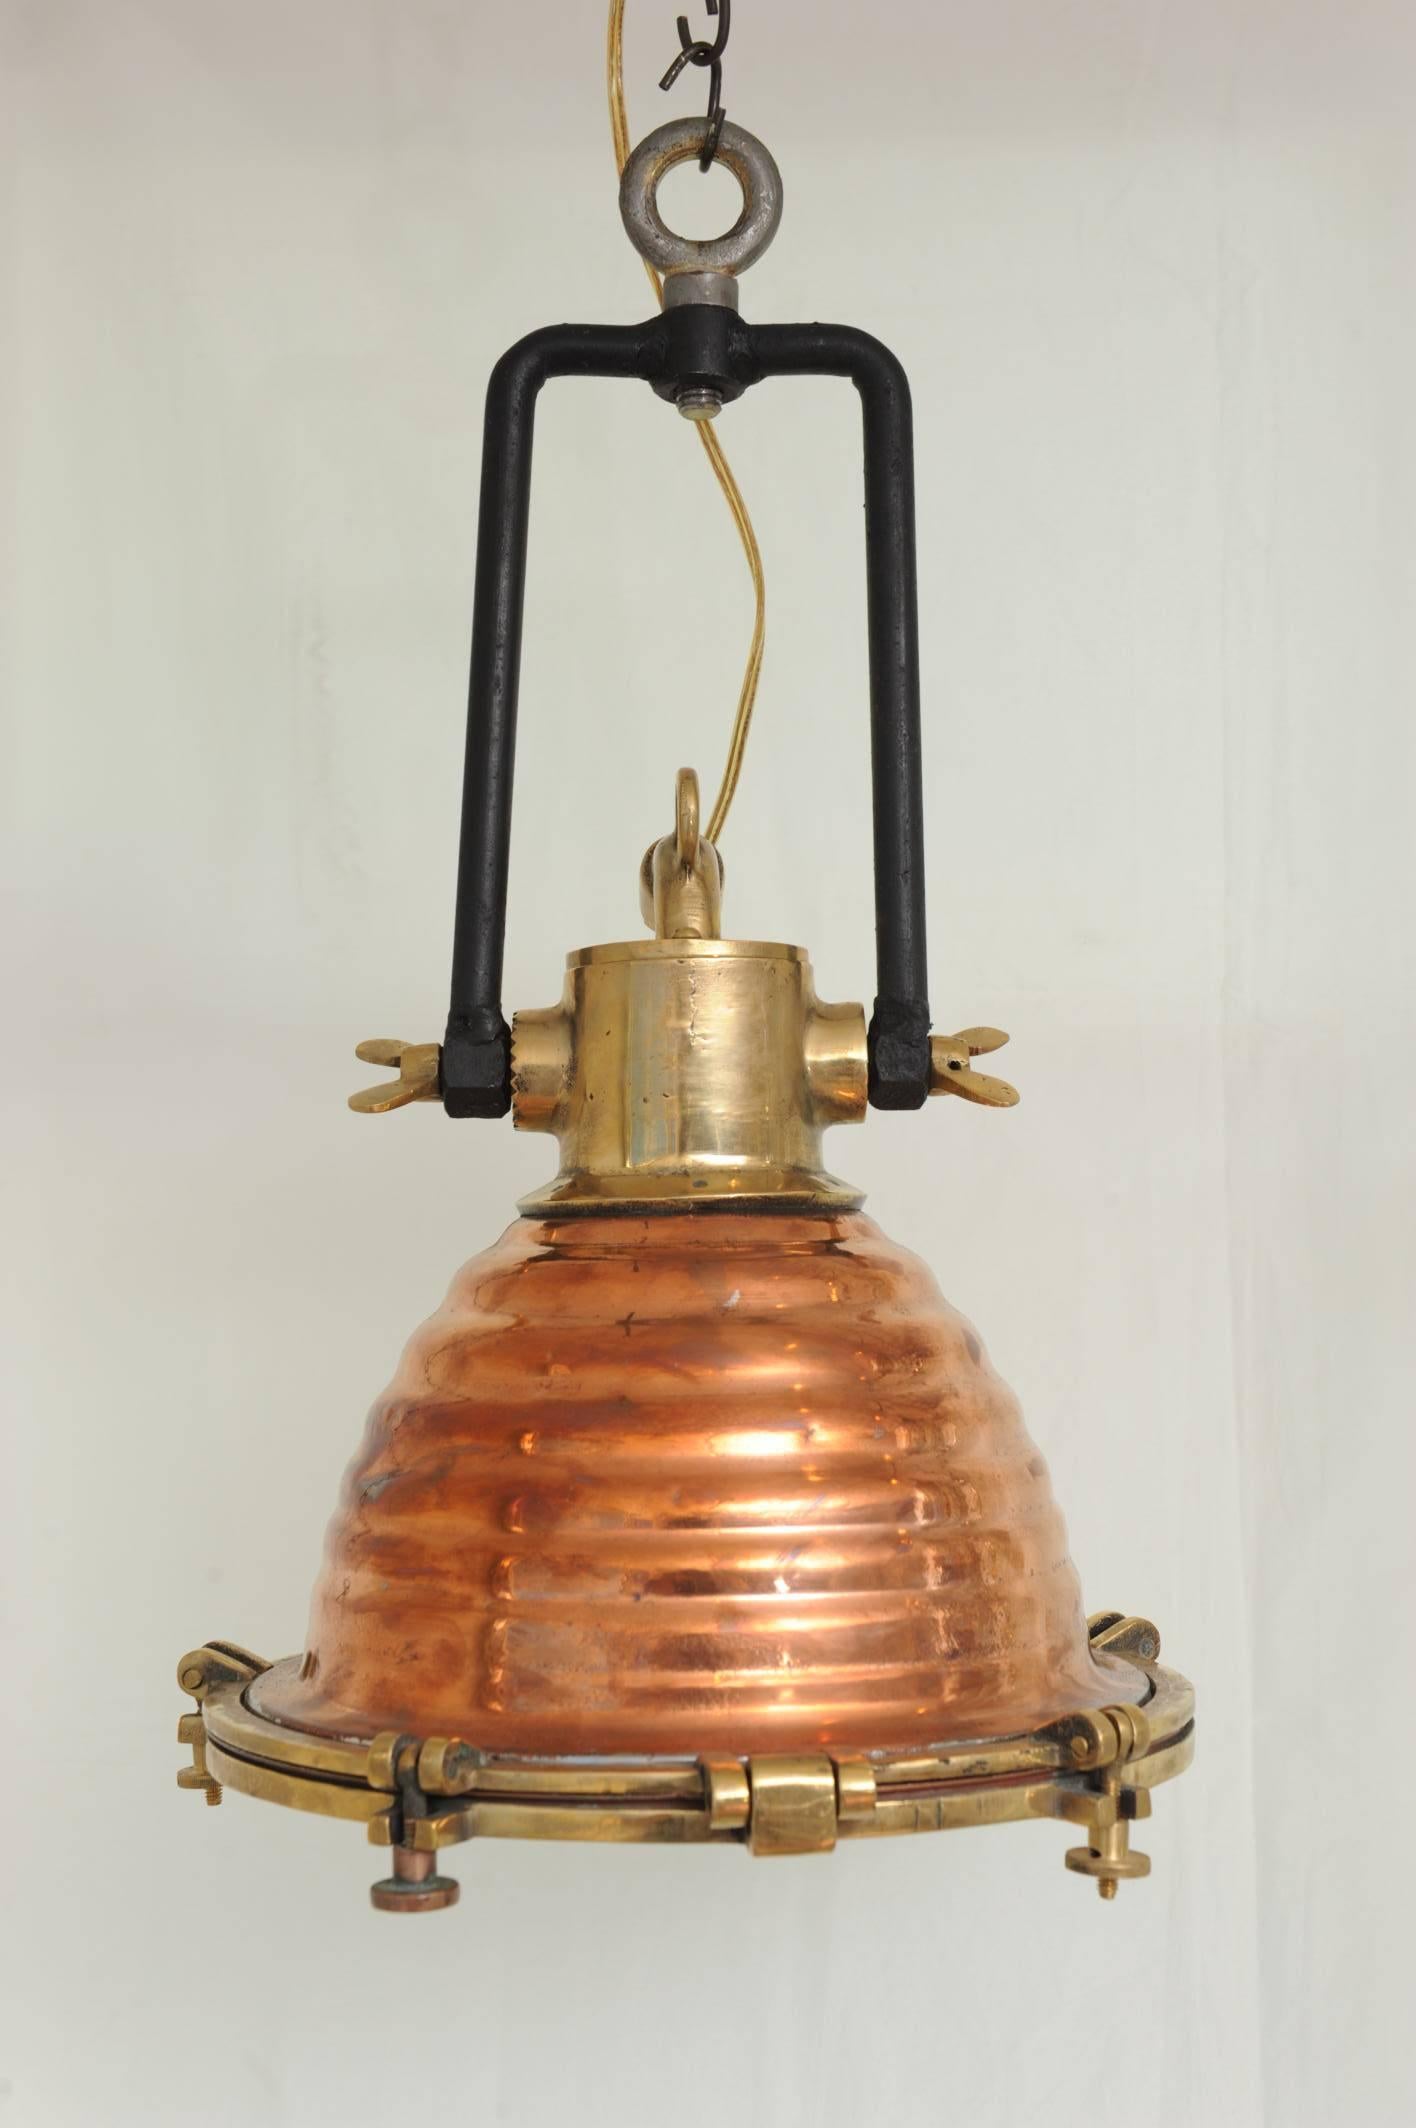 A stunning pair of copper and brass deck lights used on Mid-Century merchant ships to unload cargo at night. The interior is silver-lined to create additional reflective light and they suspended from an adjustable iron bracket. Rewired for American